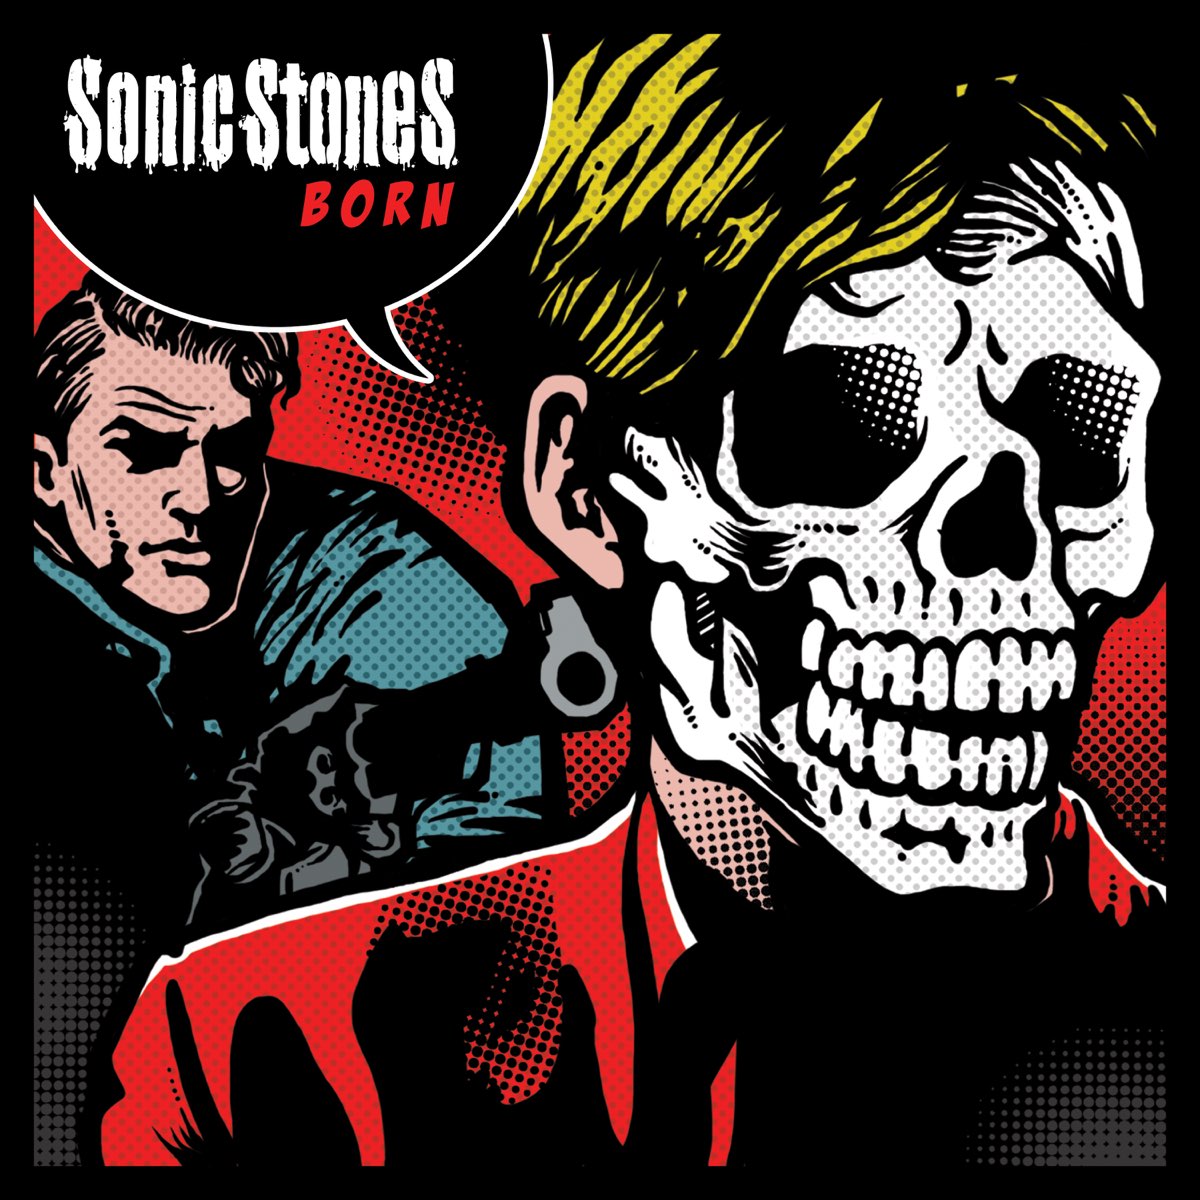 Stone born. Stone Sonic. Stoned Sonic. Why we Cry.